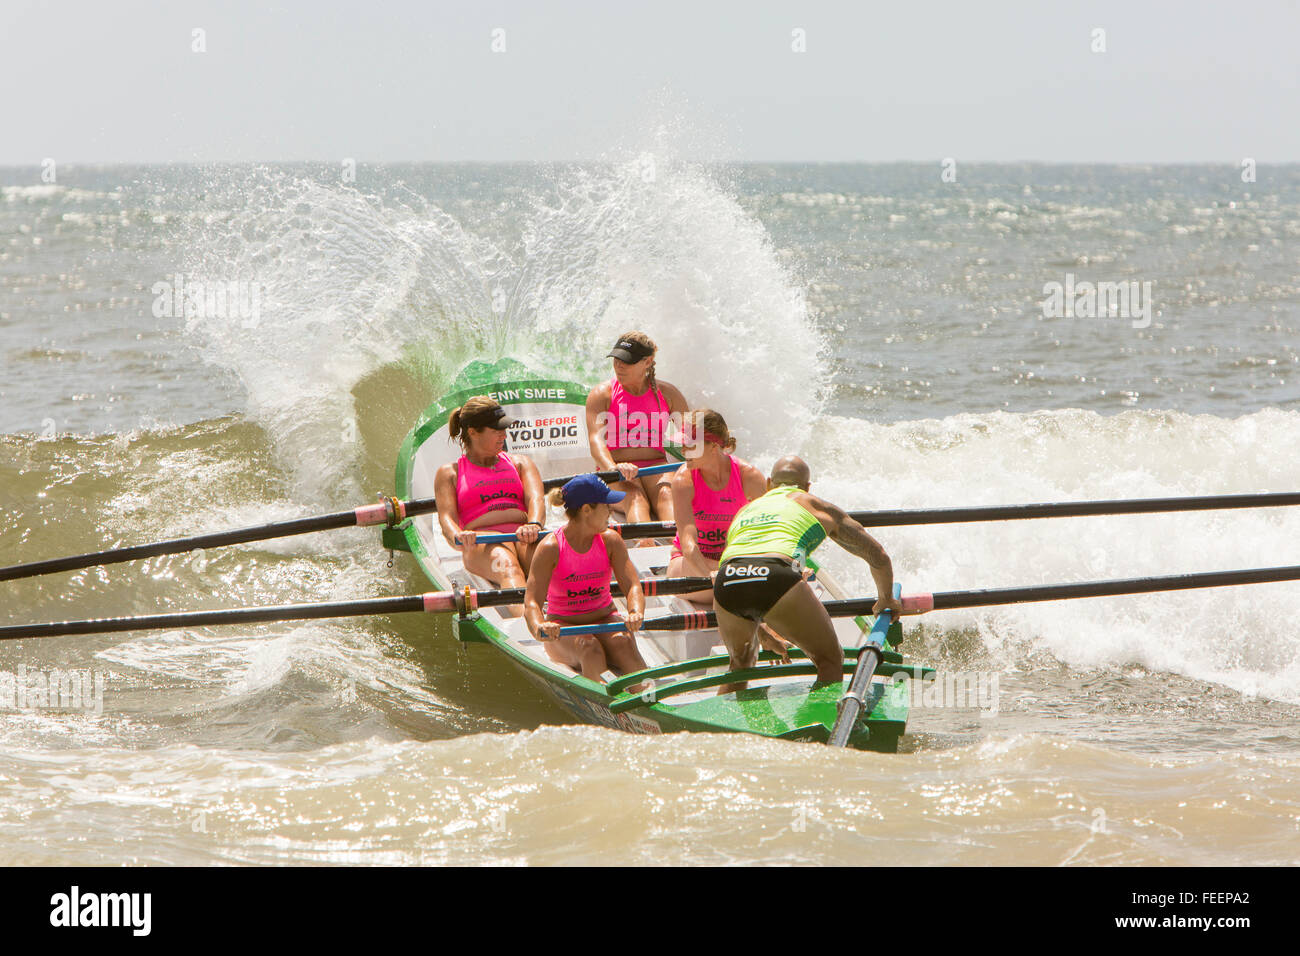 Sydney, Australia. 6th February, 2016. Ocean Thunder a televised Professional Surf boat racing event held on Collaroy Beach,Sydney, New South Wales featuring elite mens and womens surf boat series. Pictured womens female crew row their surfboat over incoming wave Stock Photo